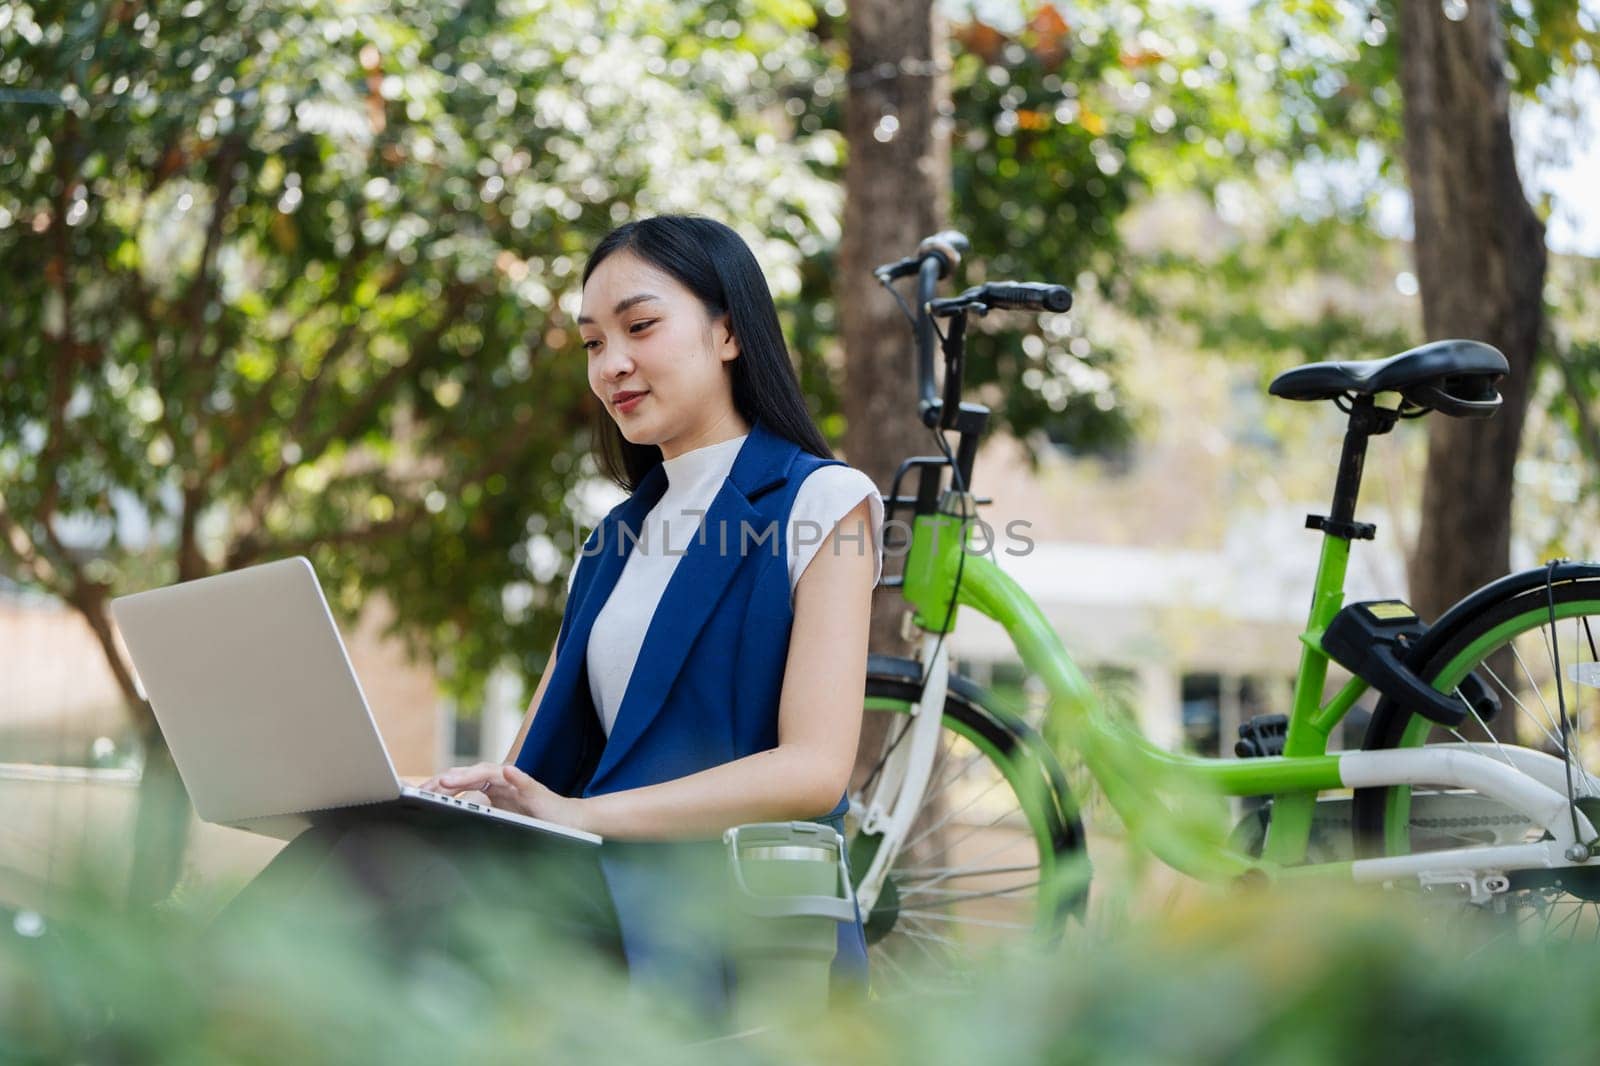 Young businesswoman sitting on stair in city park and using laptop for work hybrid. Bike to work eco friendly alternative vehicle green energy.